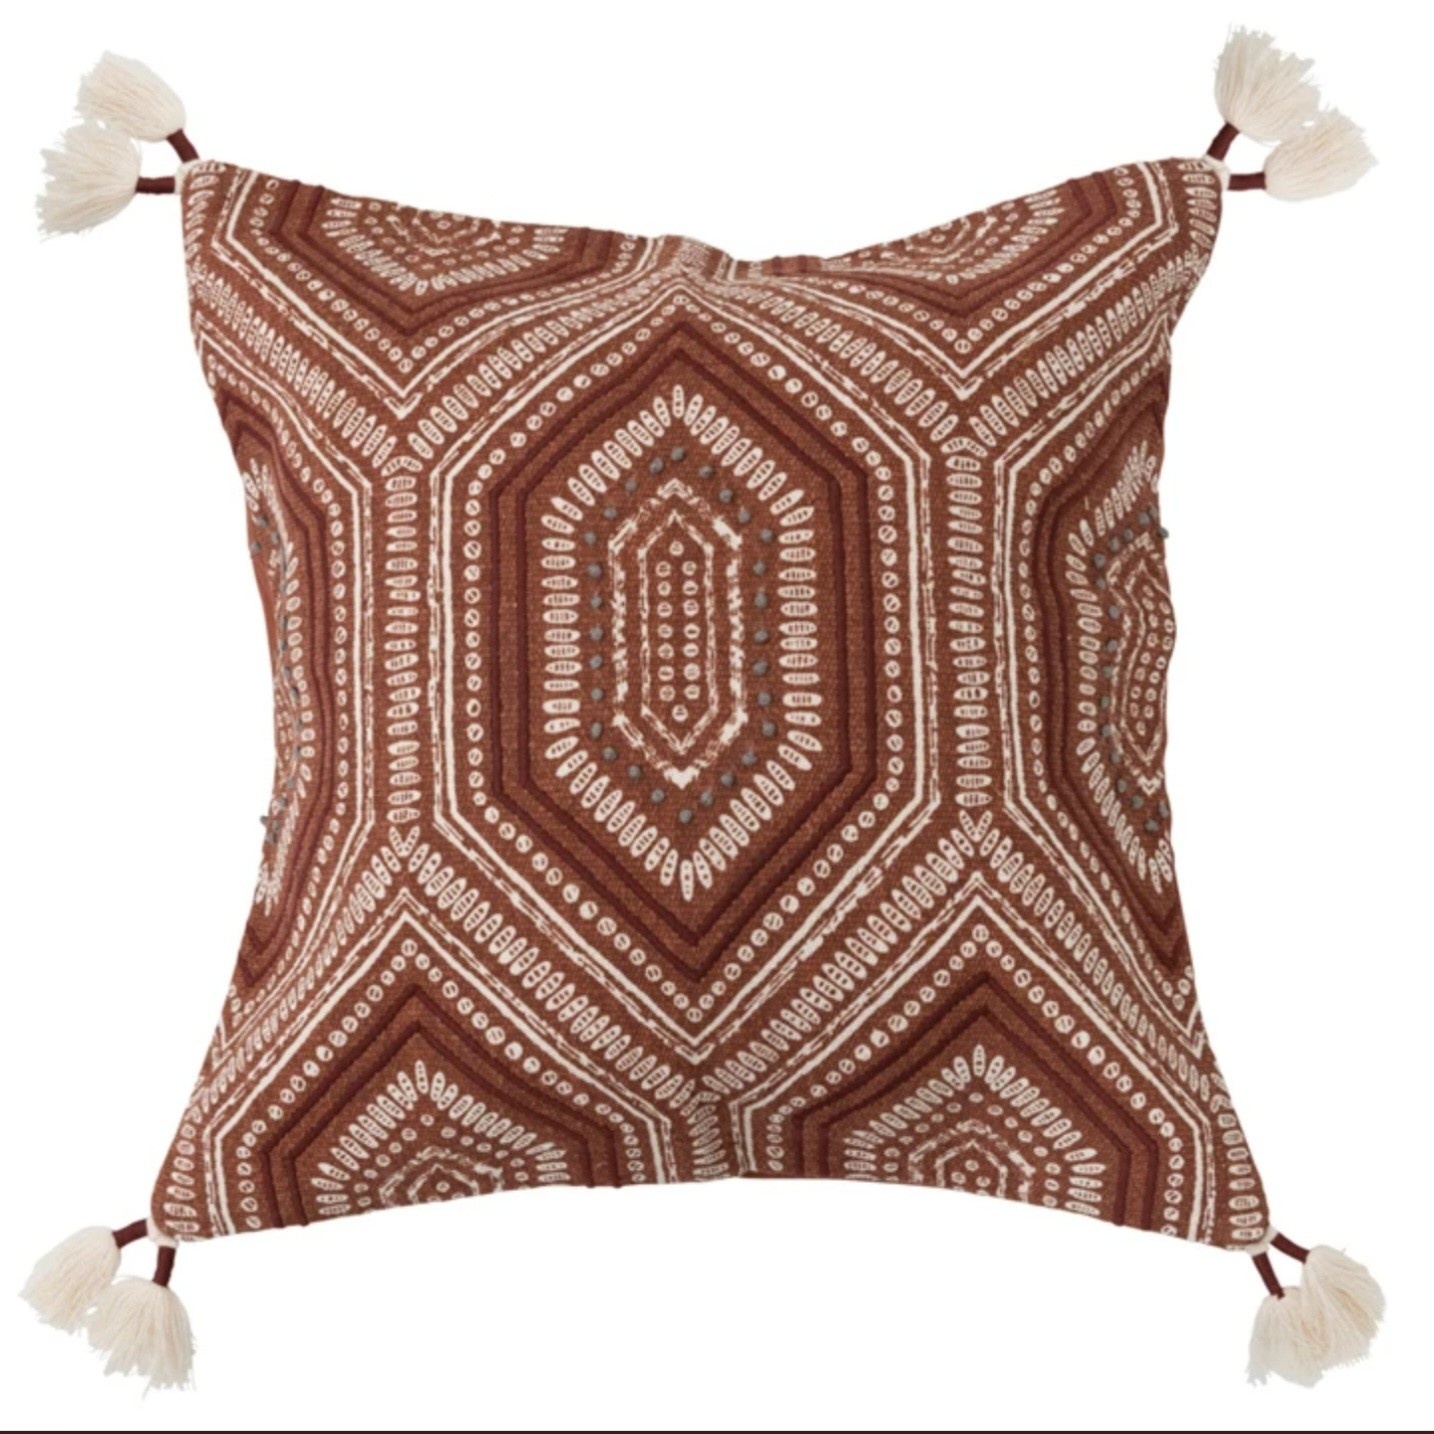 Embroidery & Tassels, Cotton Printed Pillow Rust 18" Square